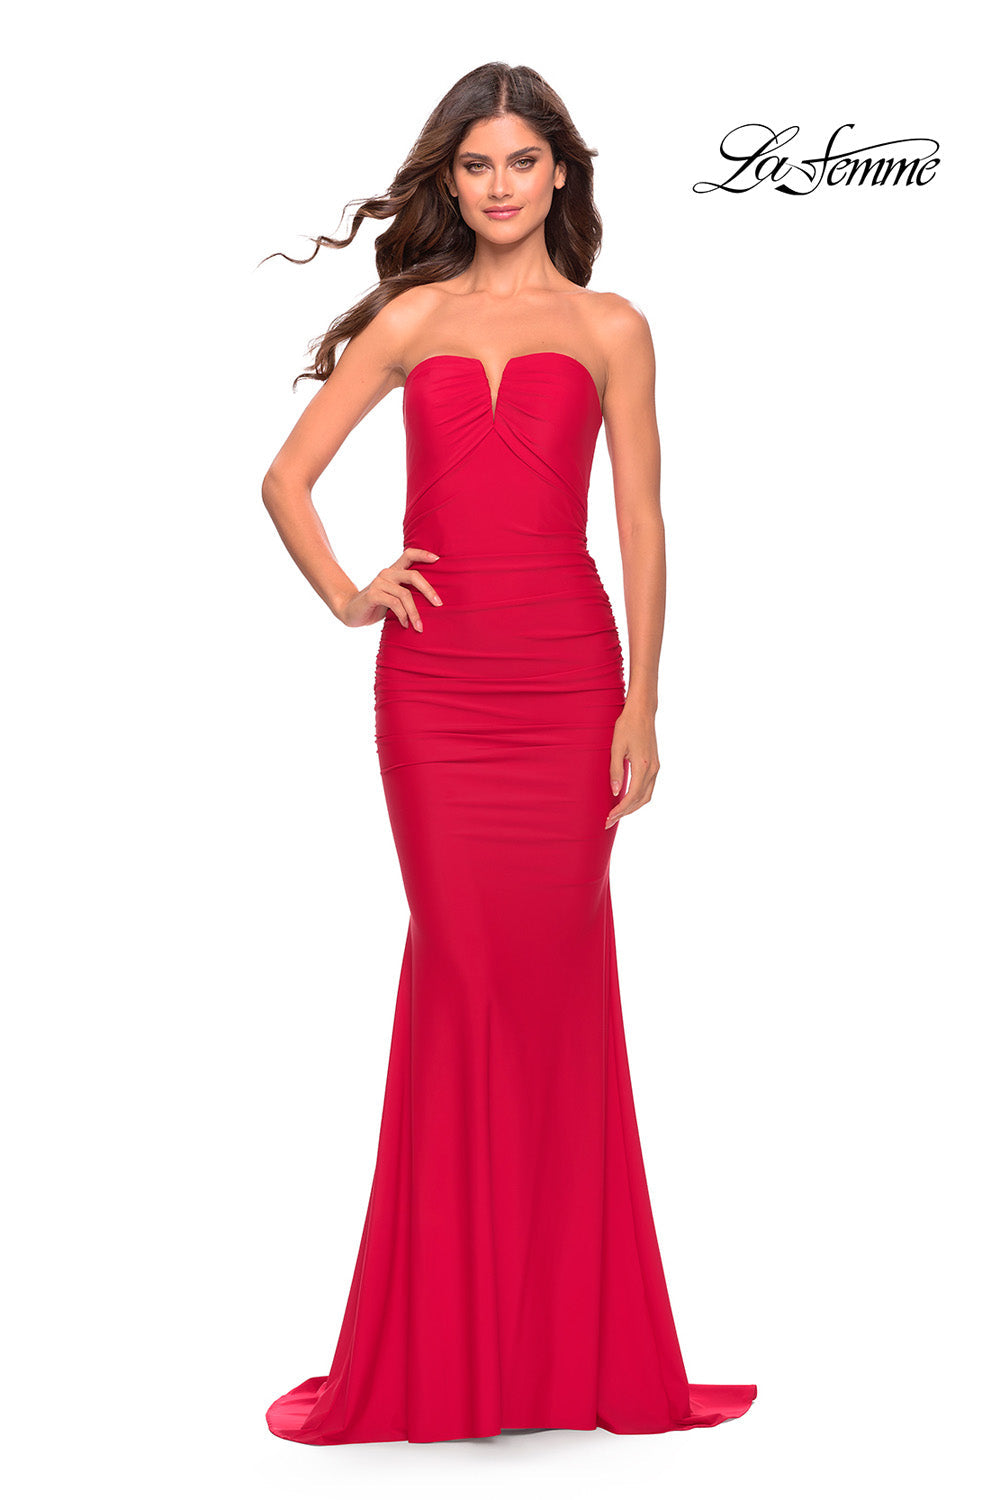 La Femme 31226 prom dress images.  La Femme 31226 is available in these colors: Black, Dark Emerald, Red, Royal Blue, Sage.